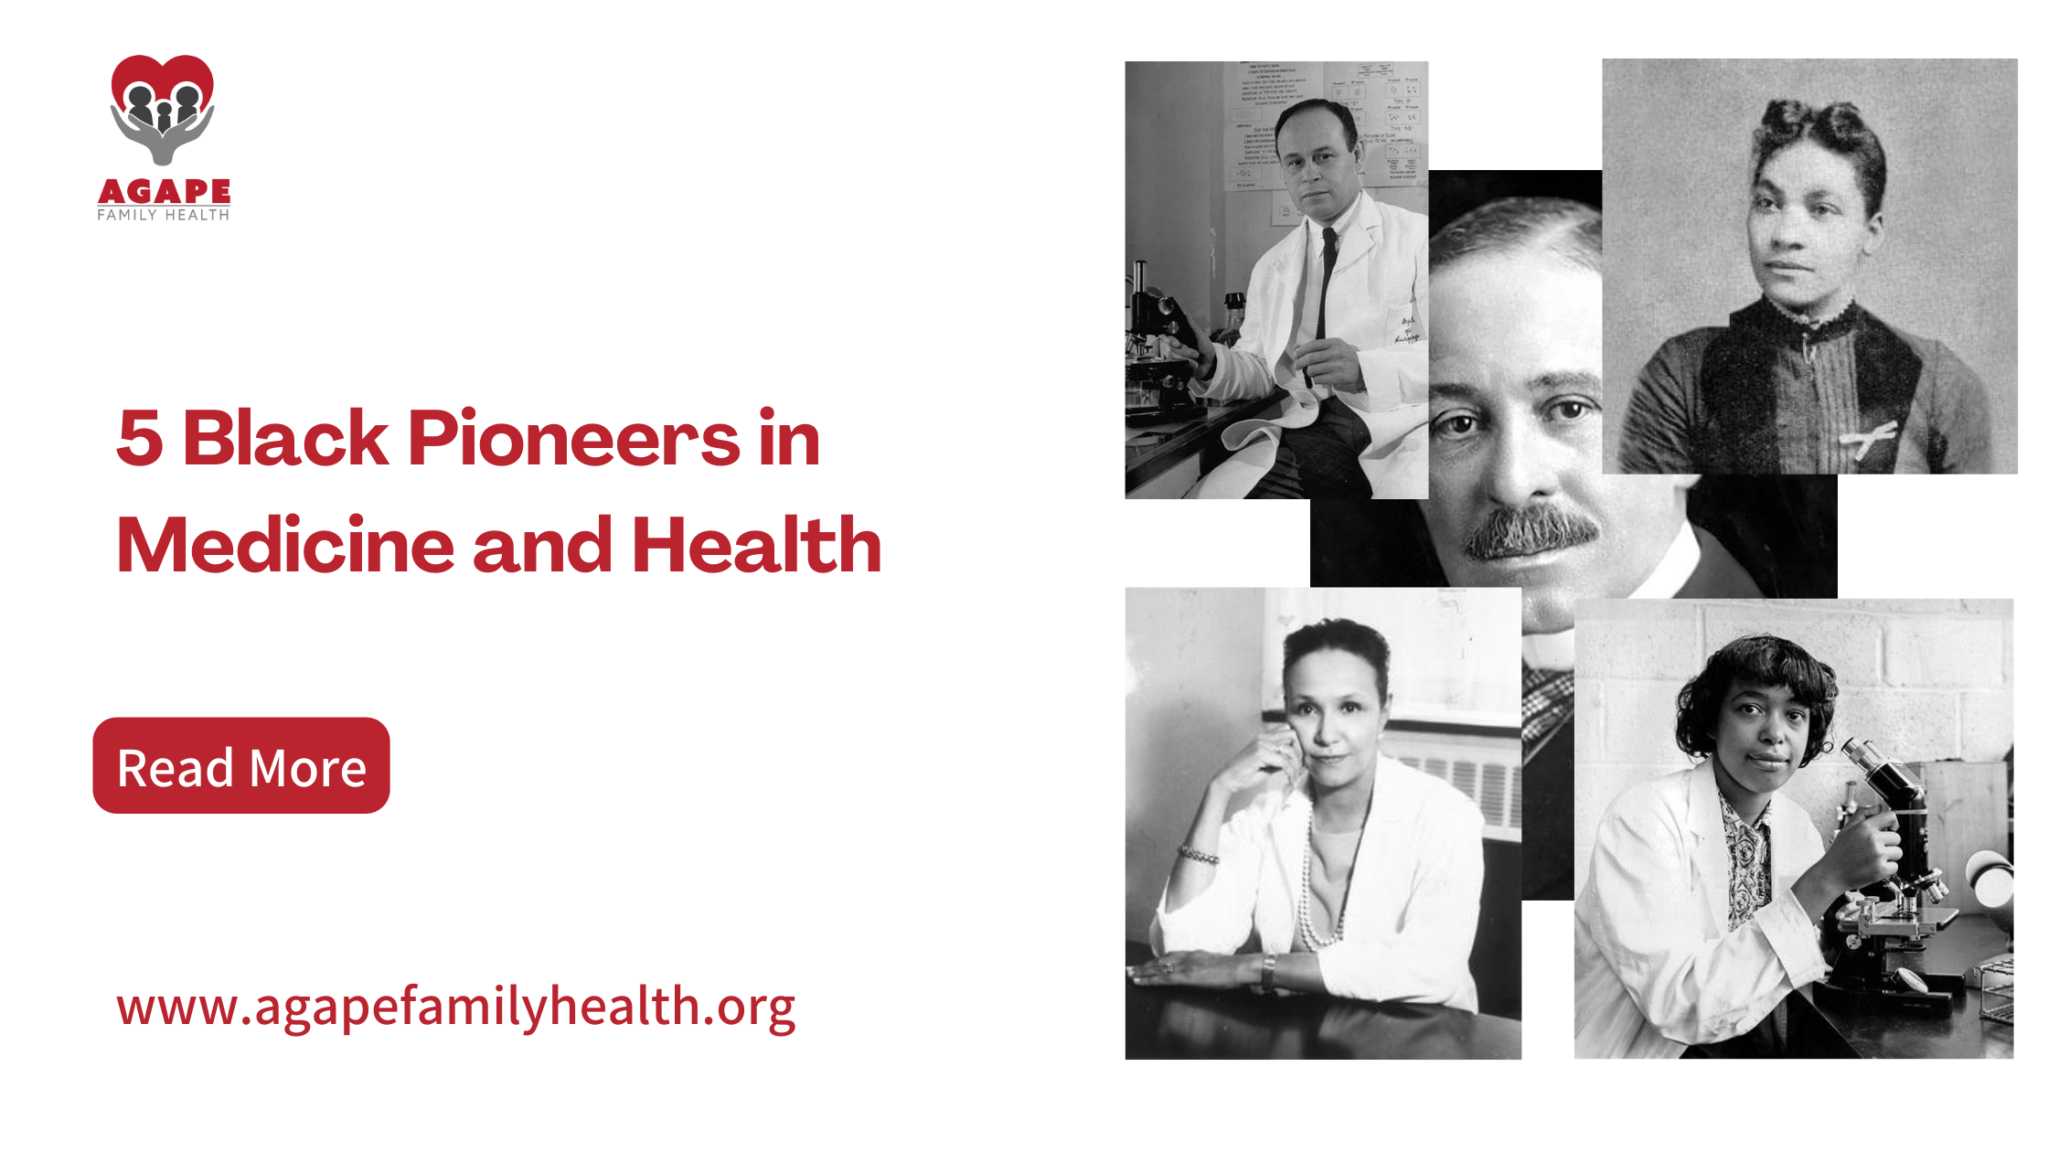 5 Black Pioneers in Medicine and Health